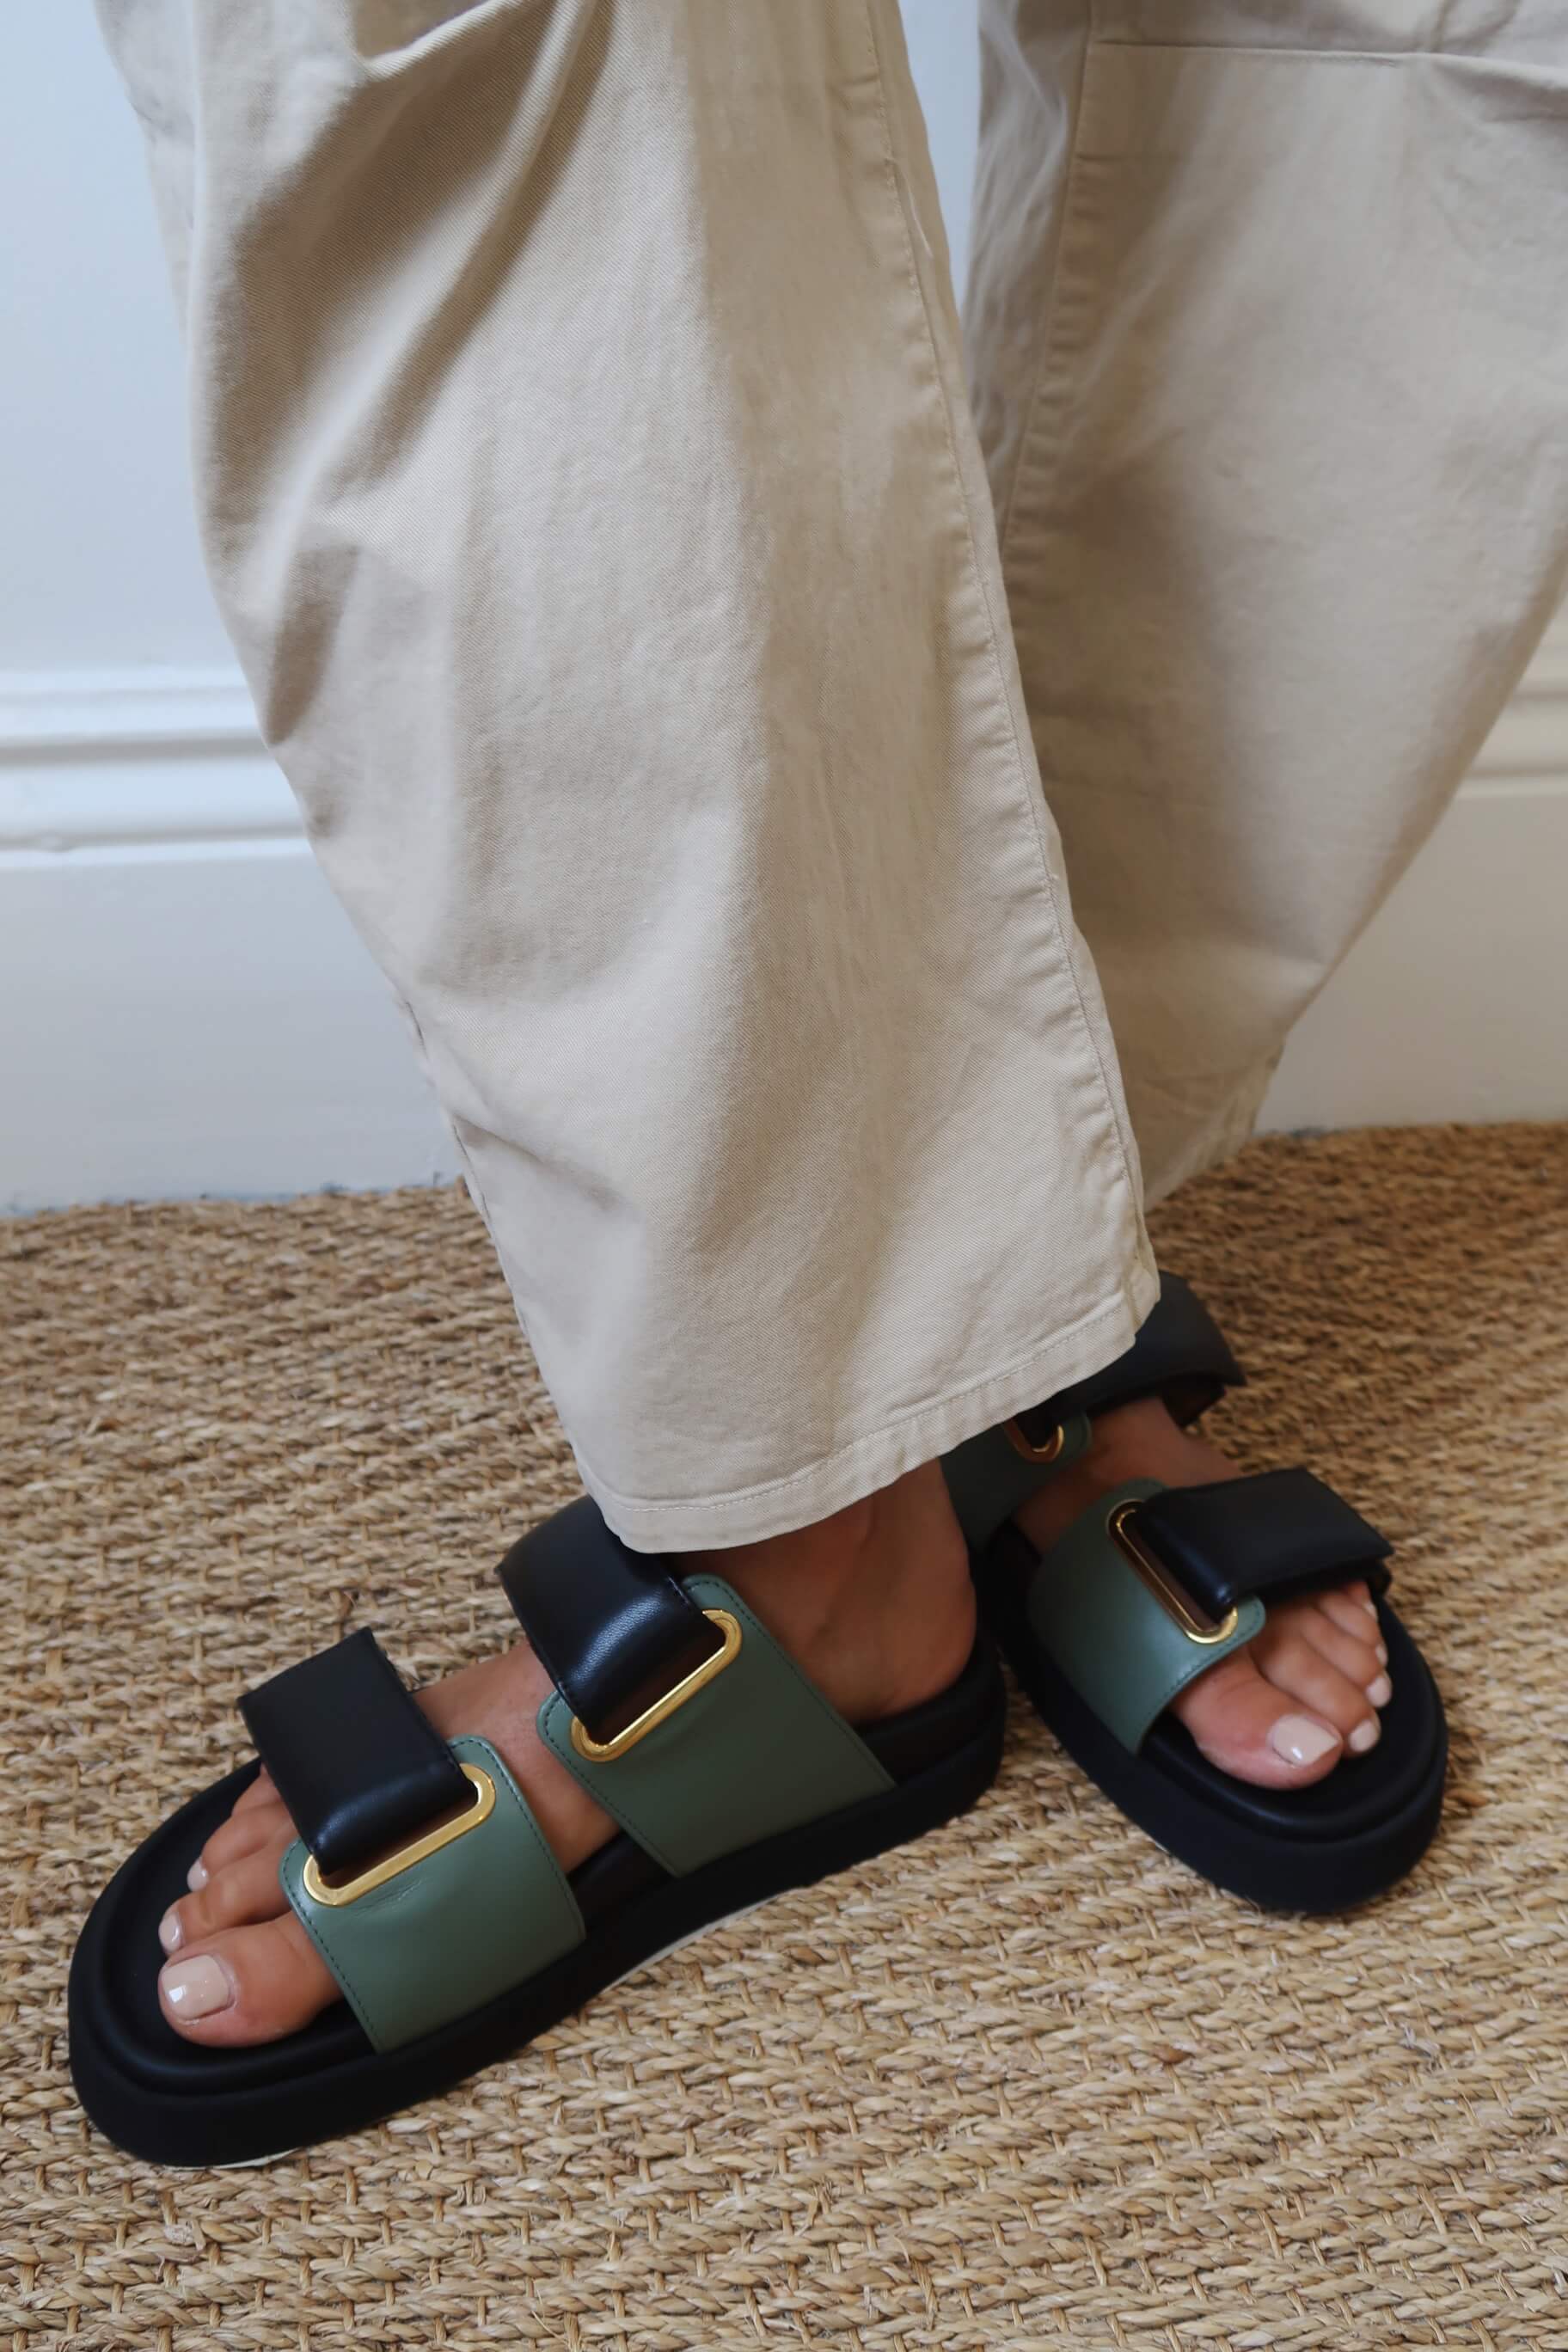 Bare Base Fussbett Sandal in Black and Olive available at The New Trend